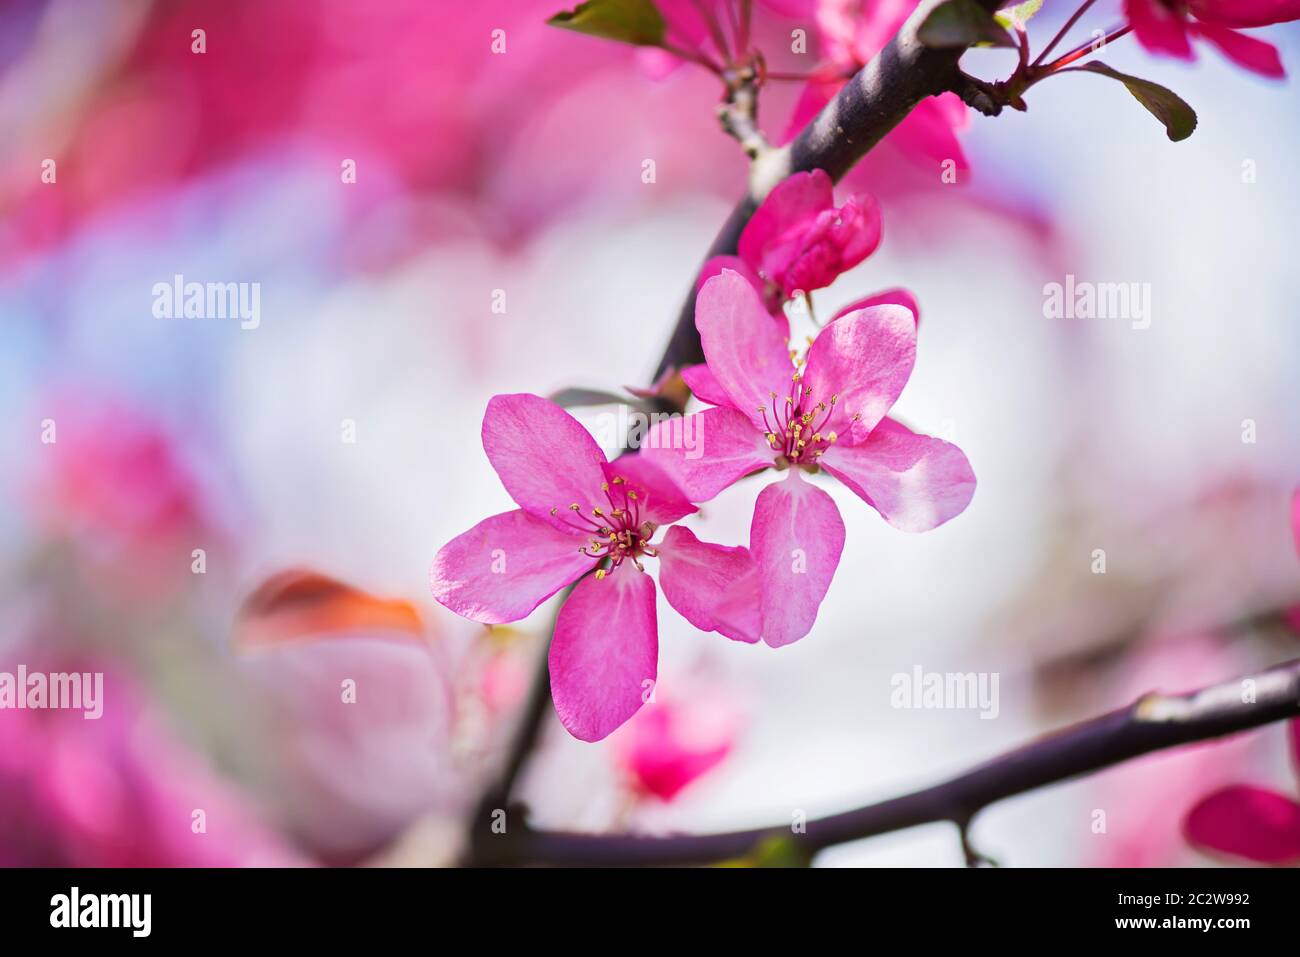 Pink flowers on the decorative apple bush over blurred background. Shallow depth of field. Stock Photo